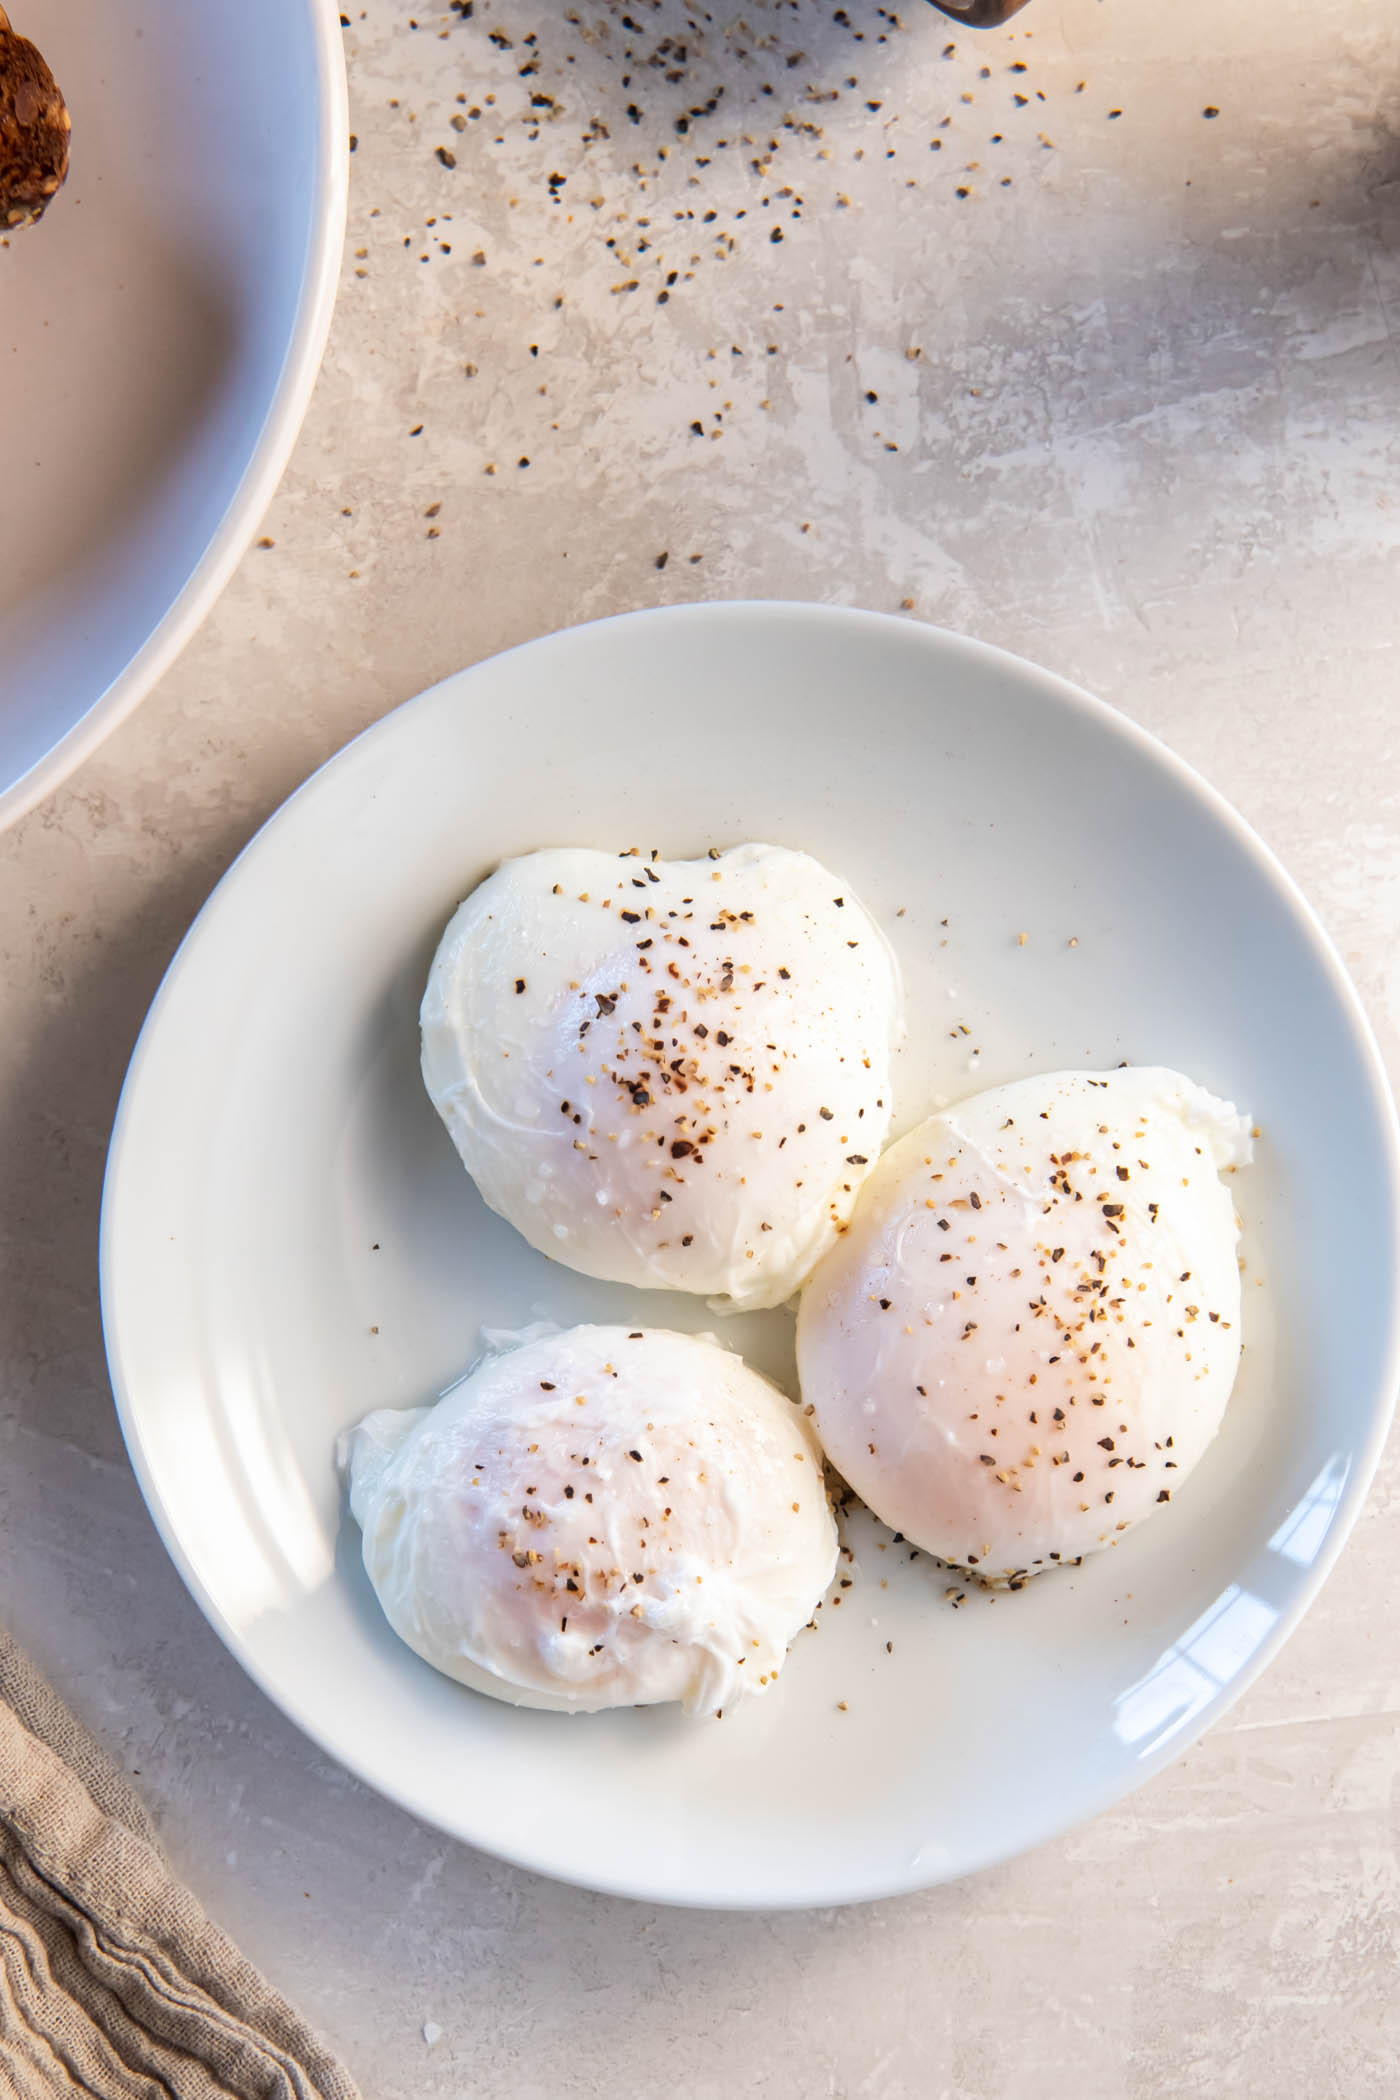 Three poached eggs with salt and pepper on a plate.